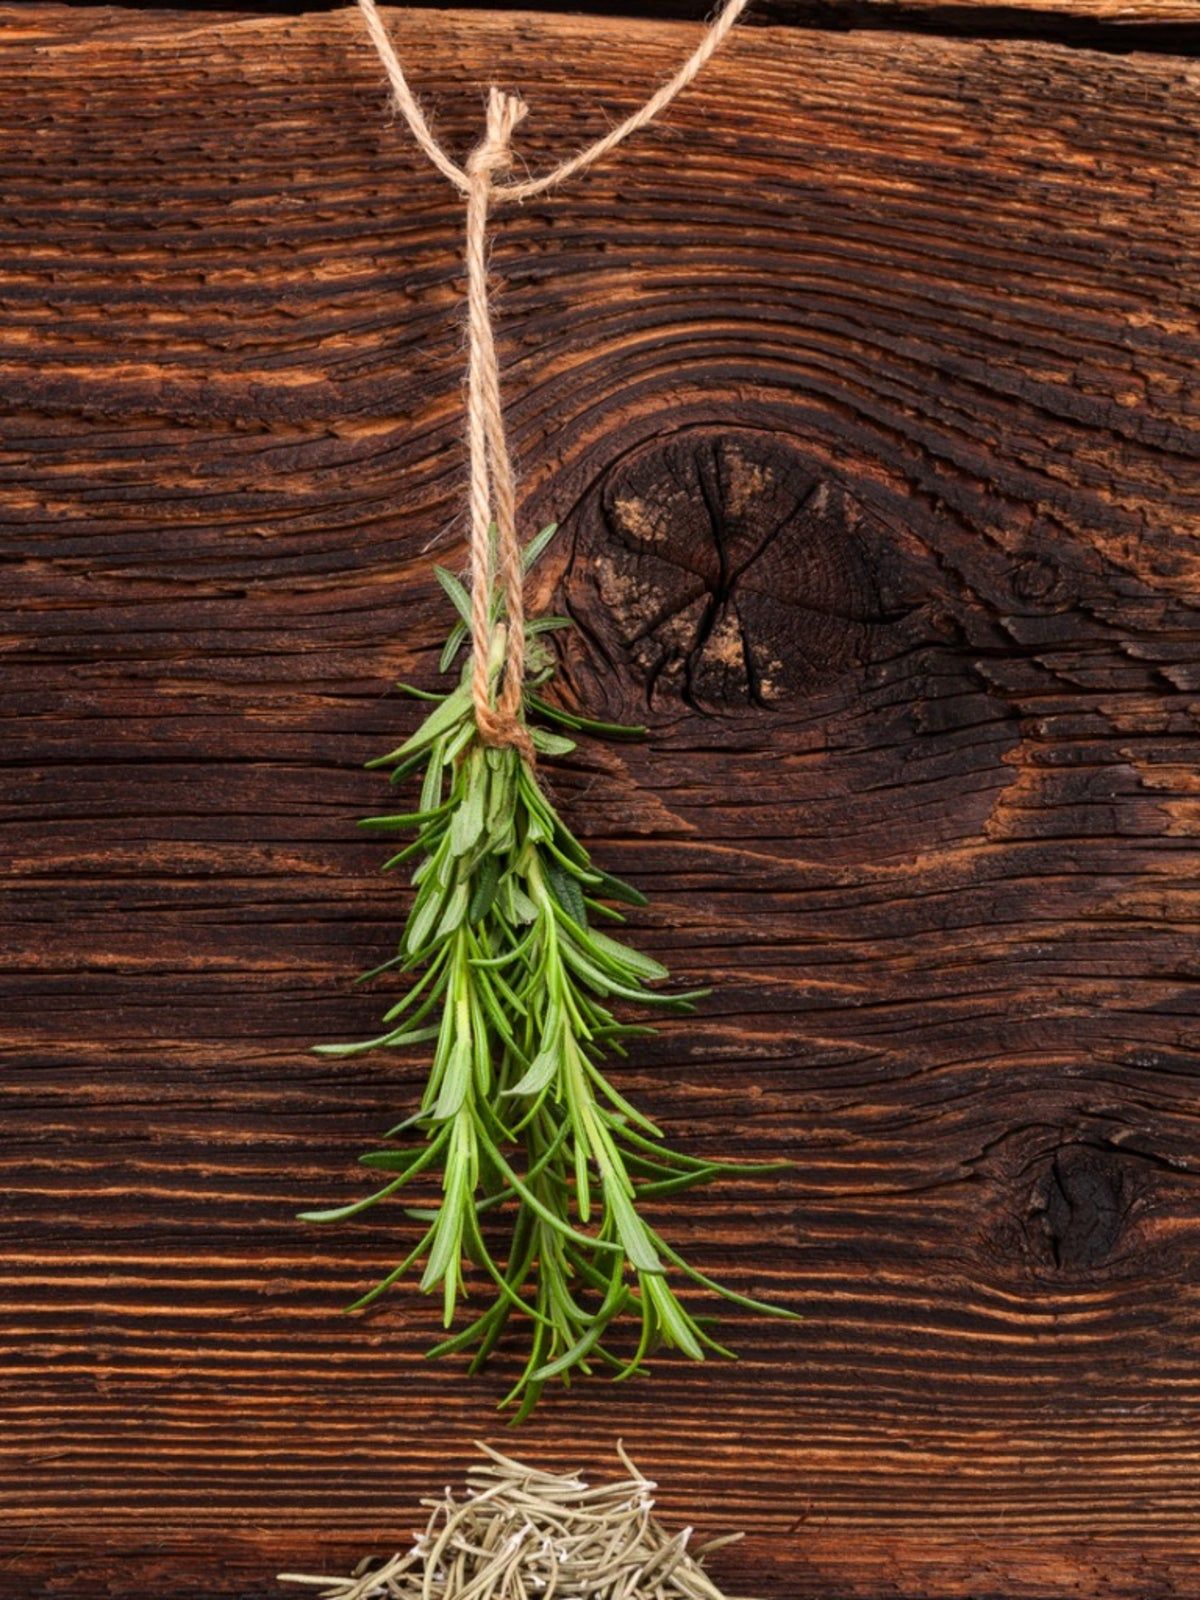 Harvesting Rosemary And How To Dry Rosemary